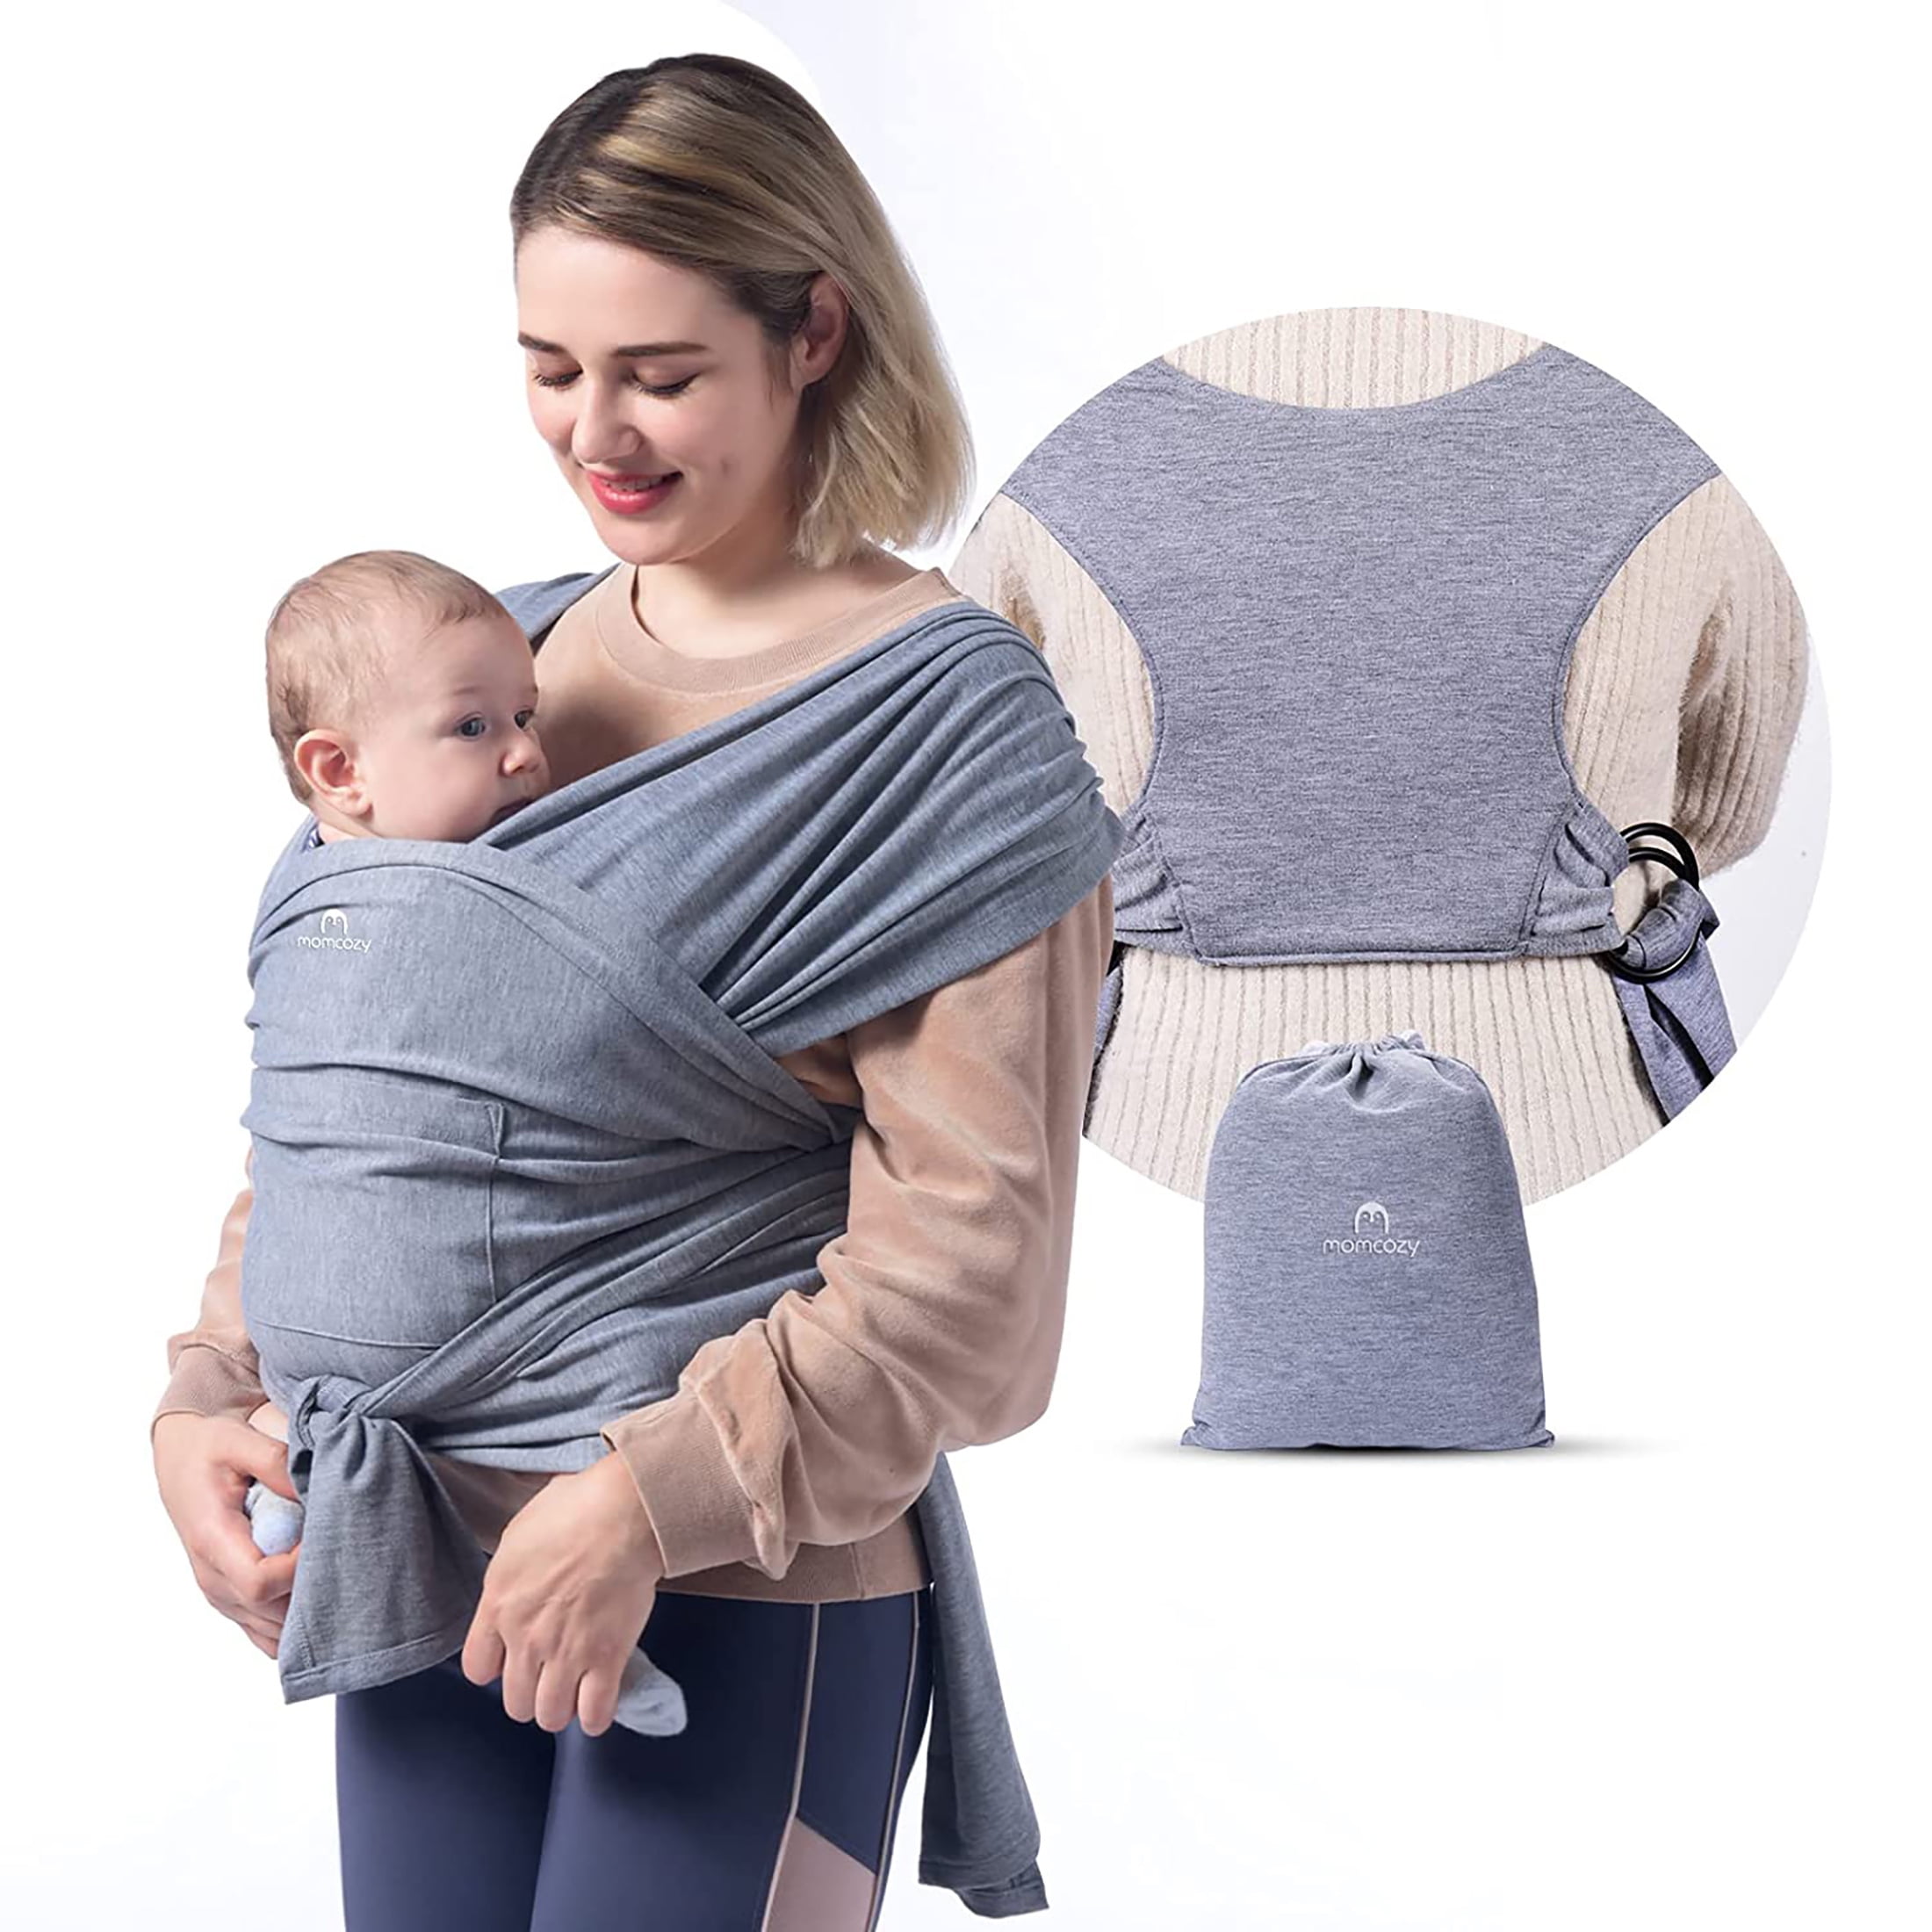 Hands Free for Mommy Momcozy Baby Wrap Carrier Slings & Universal Stroller Organizer with Insulated Cup Holder 